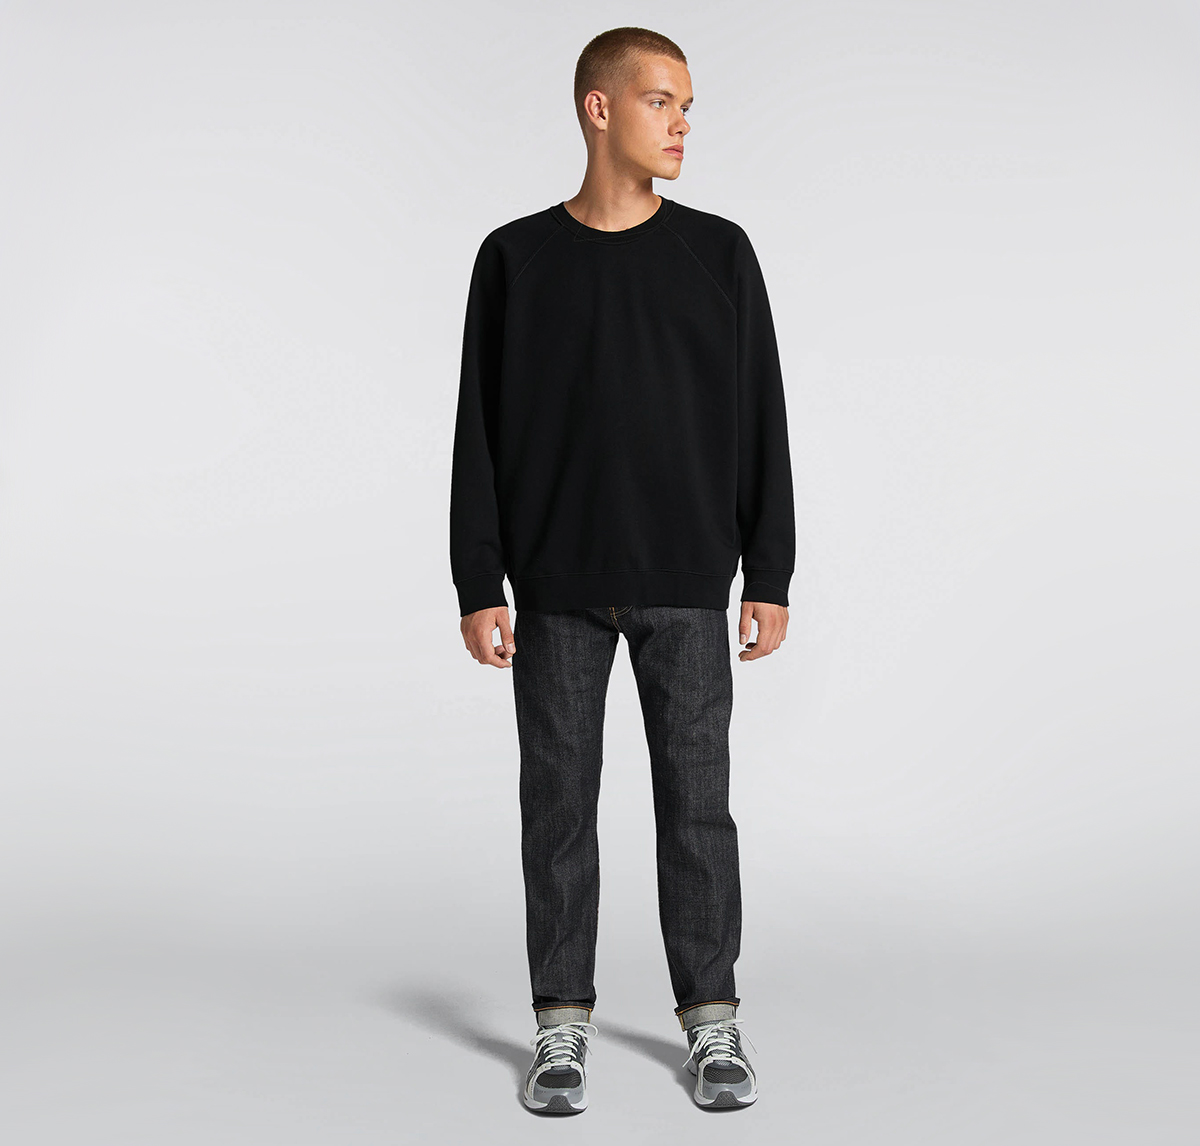 EDWIN x TEIDE - Panther Sweater - Black outfit